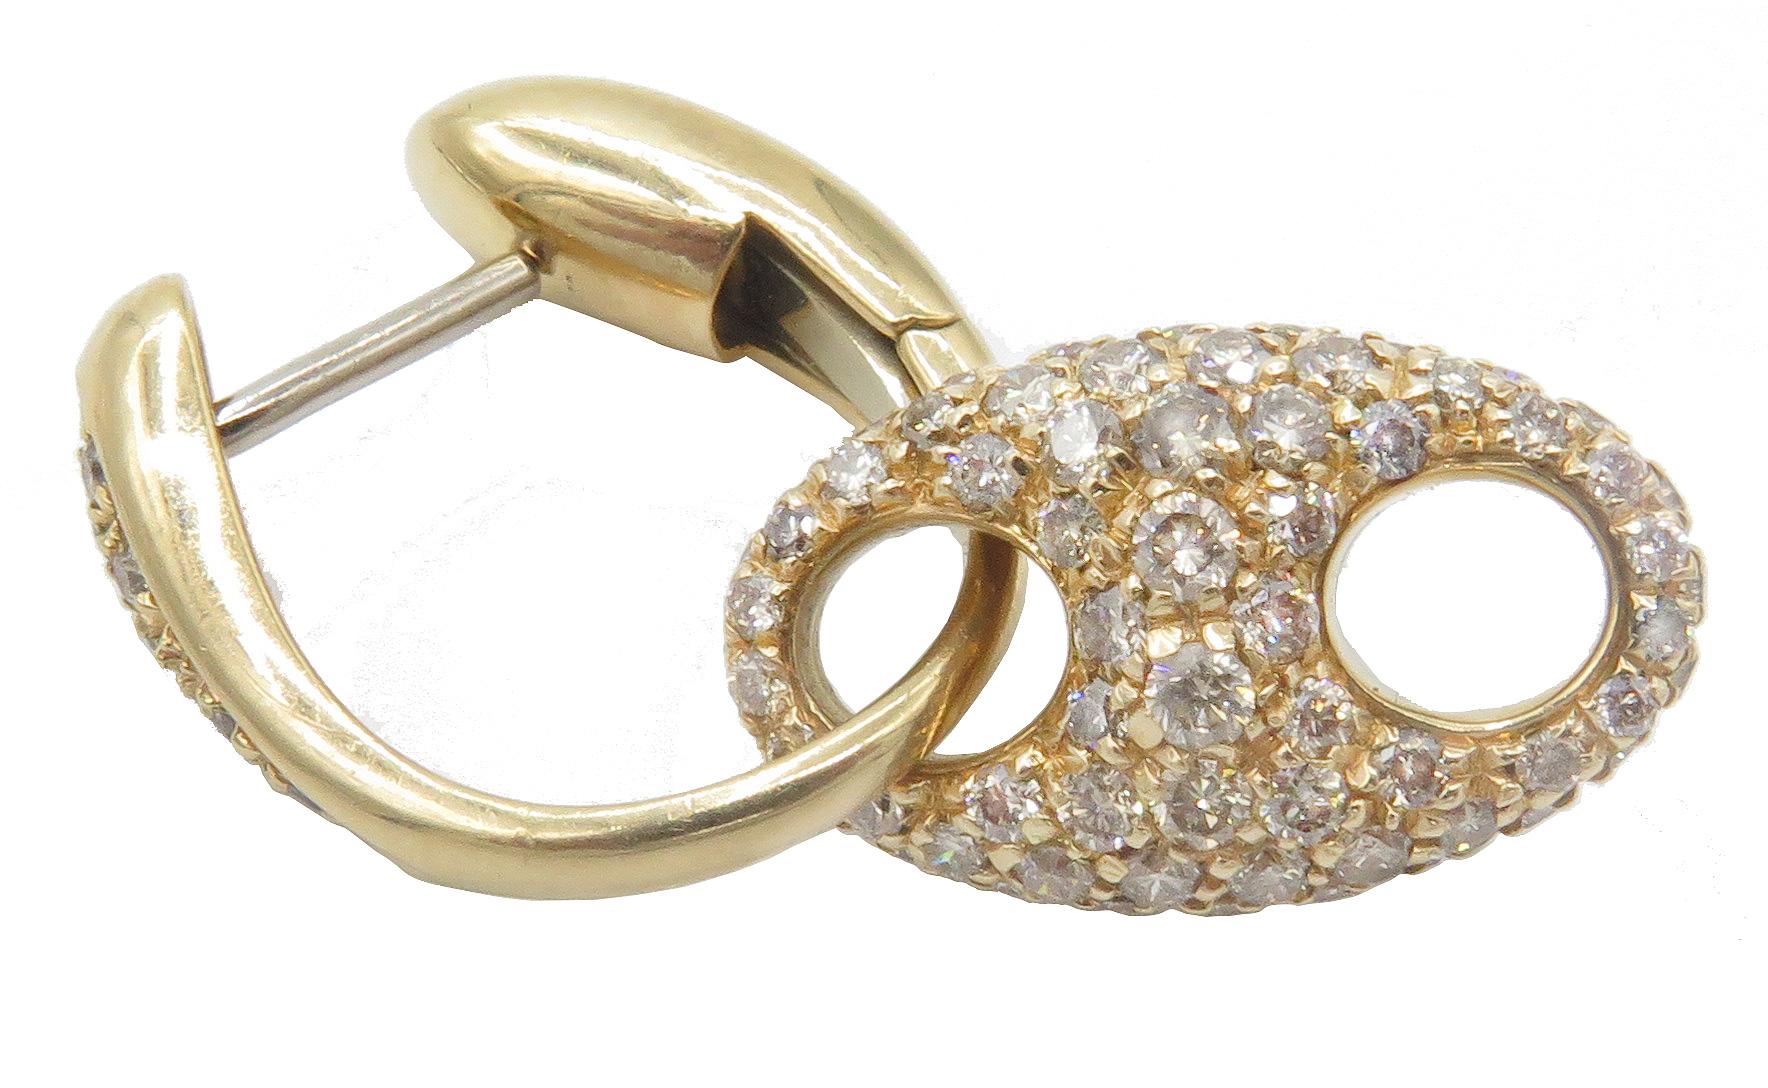 Beautiful, pave diamonds earrings from Valente's 